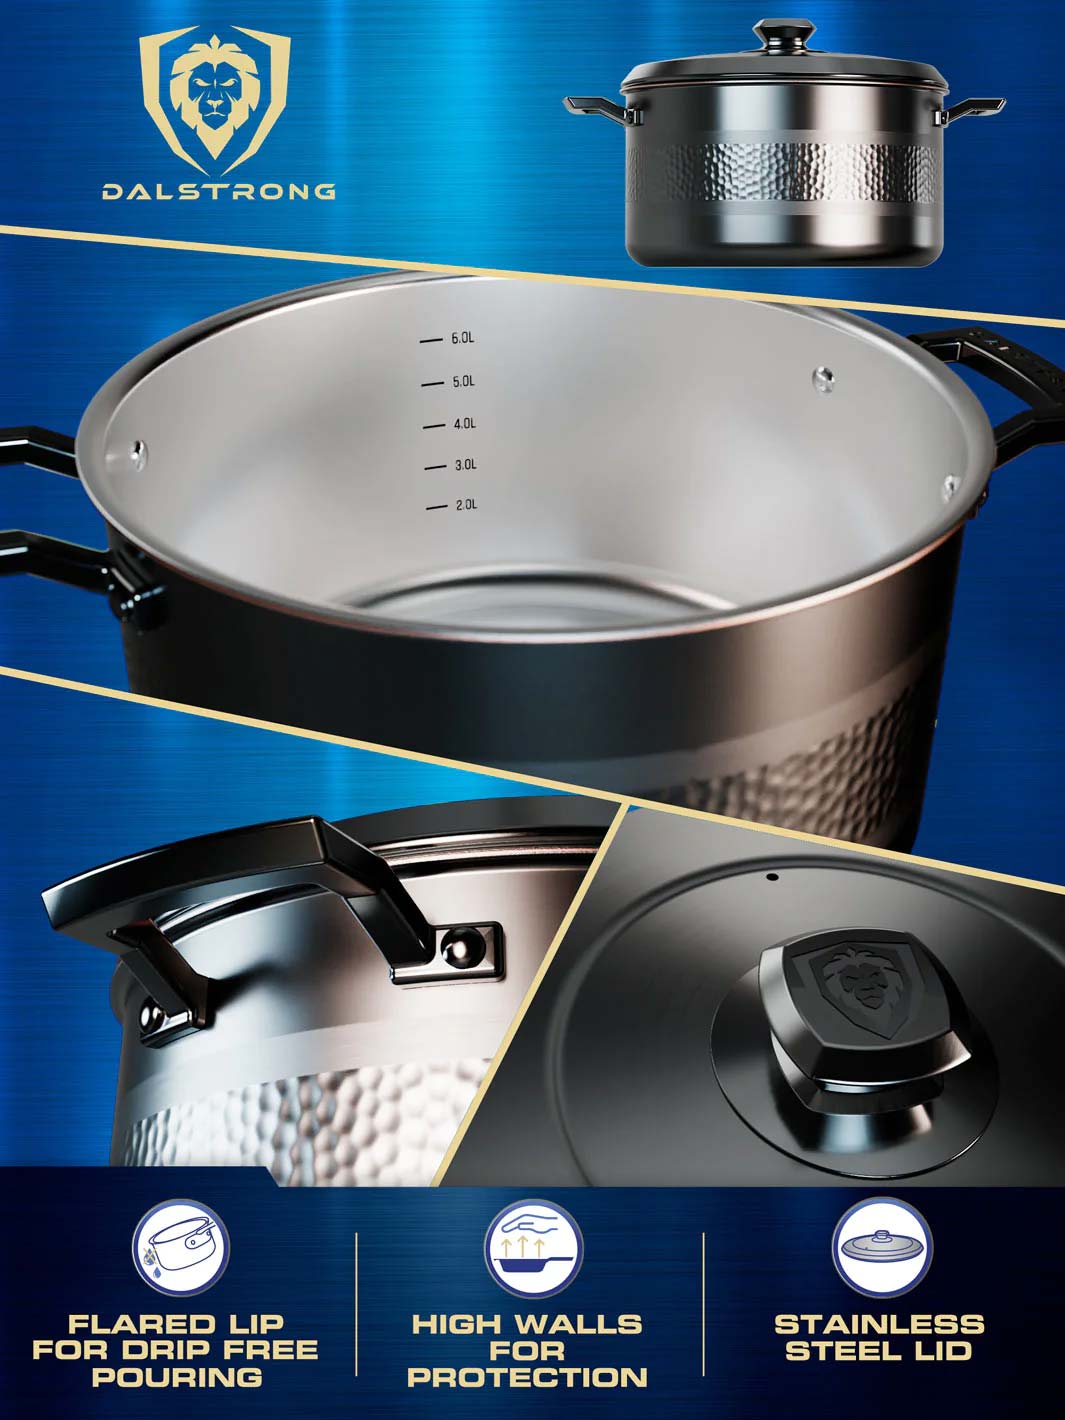 Dalstrong avalon series 8 quart stock pot hammered finish black showcasing it's high walls and stainless steel lid.